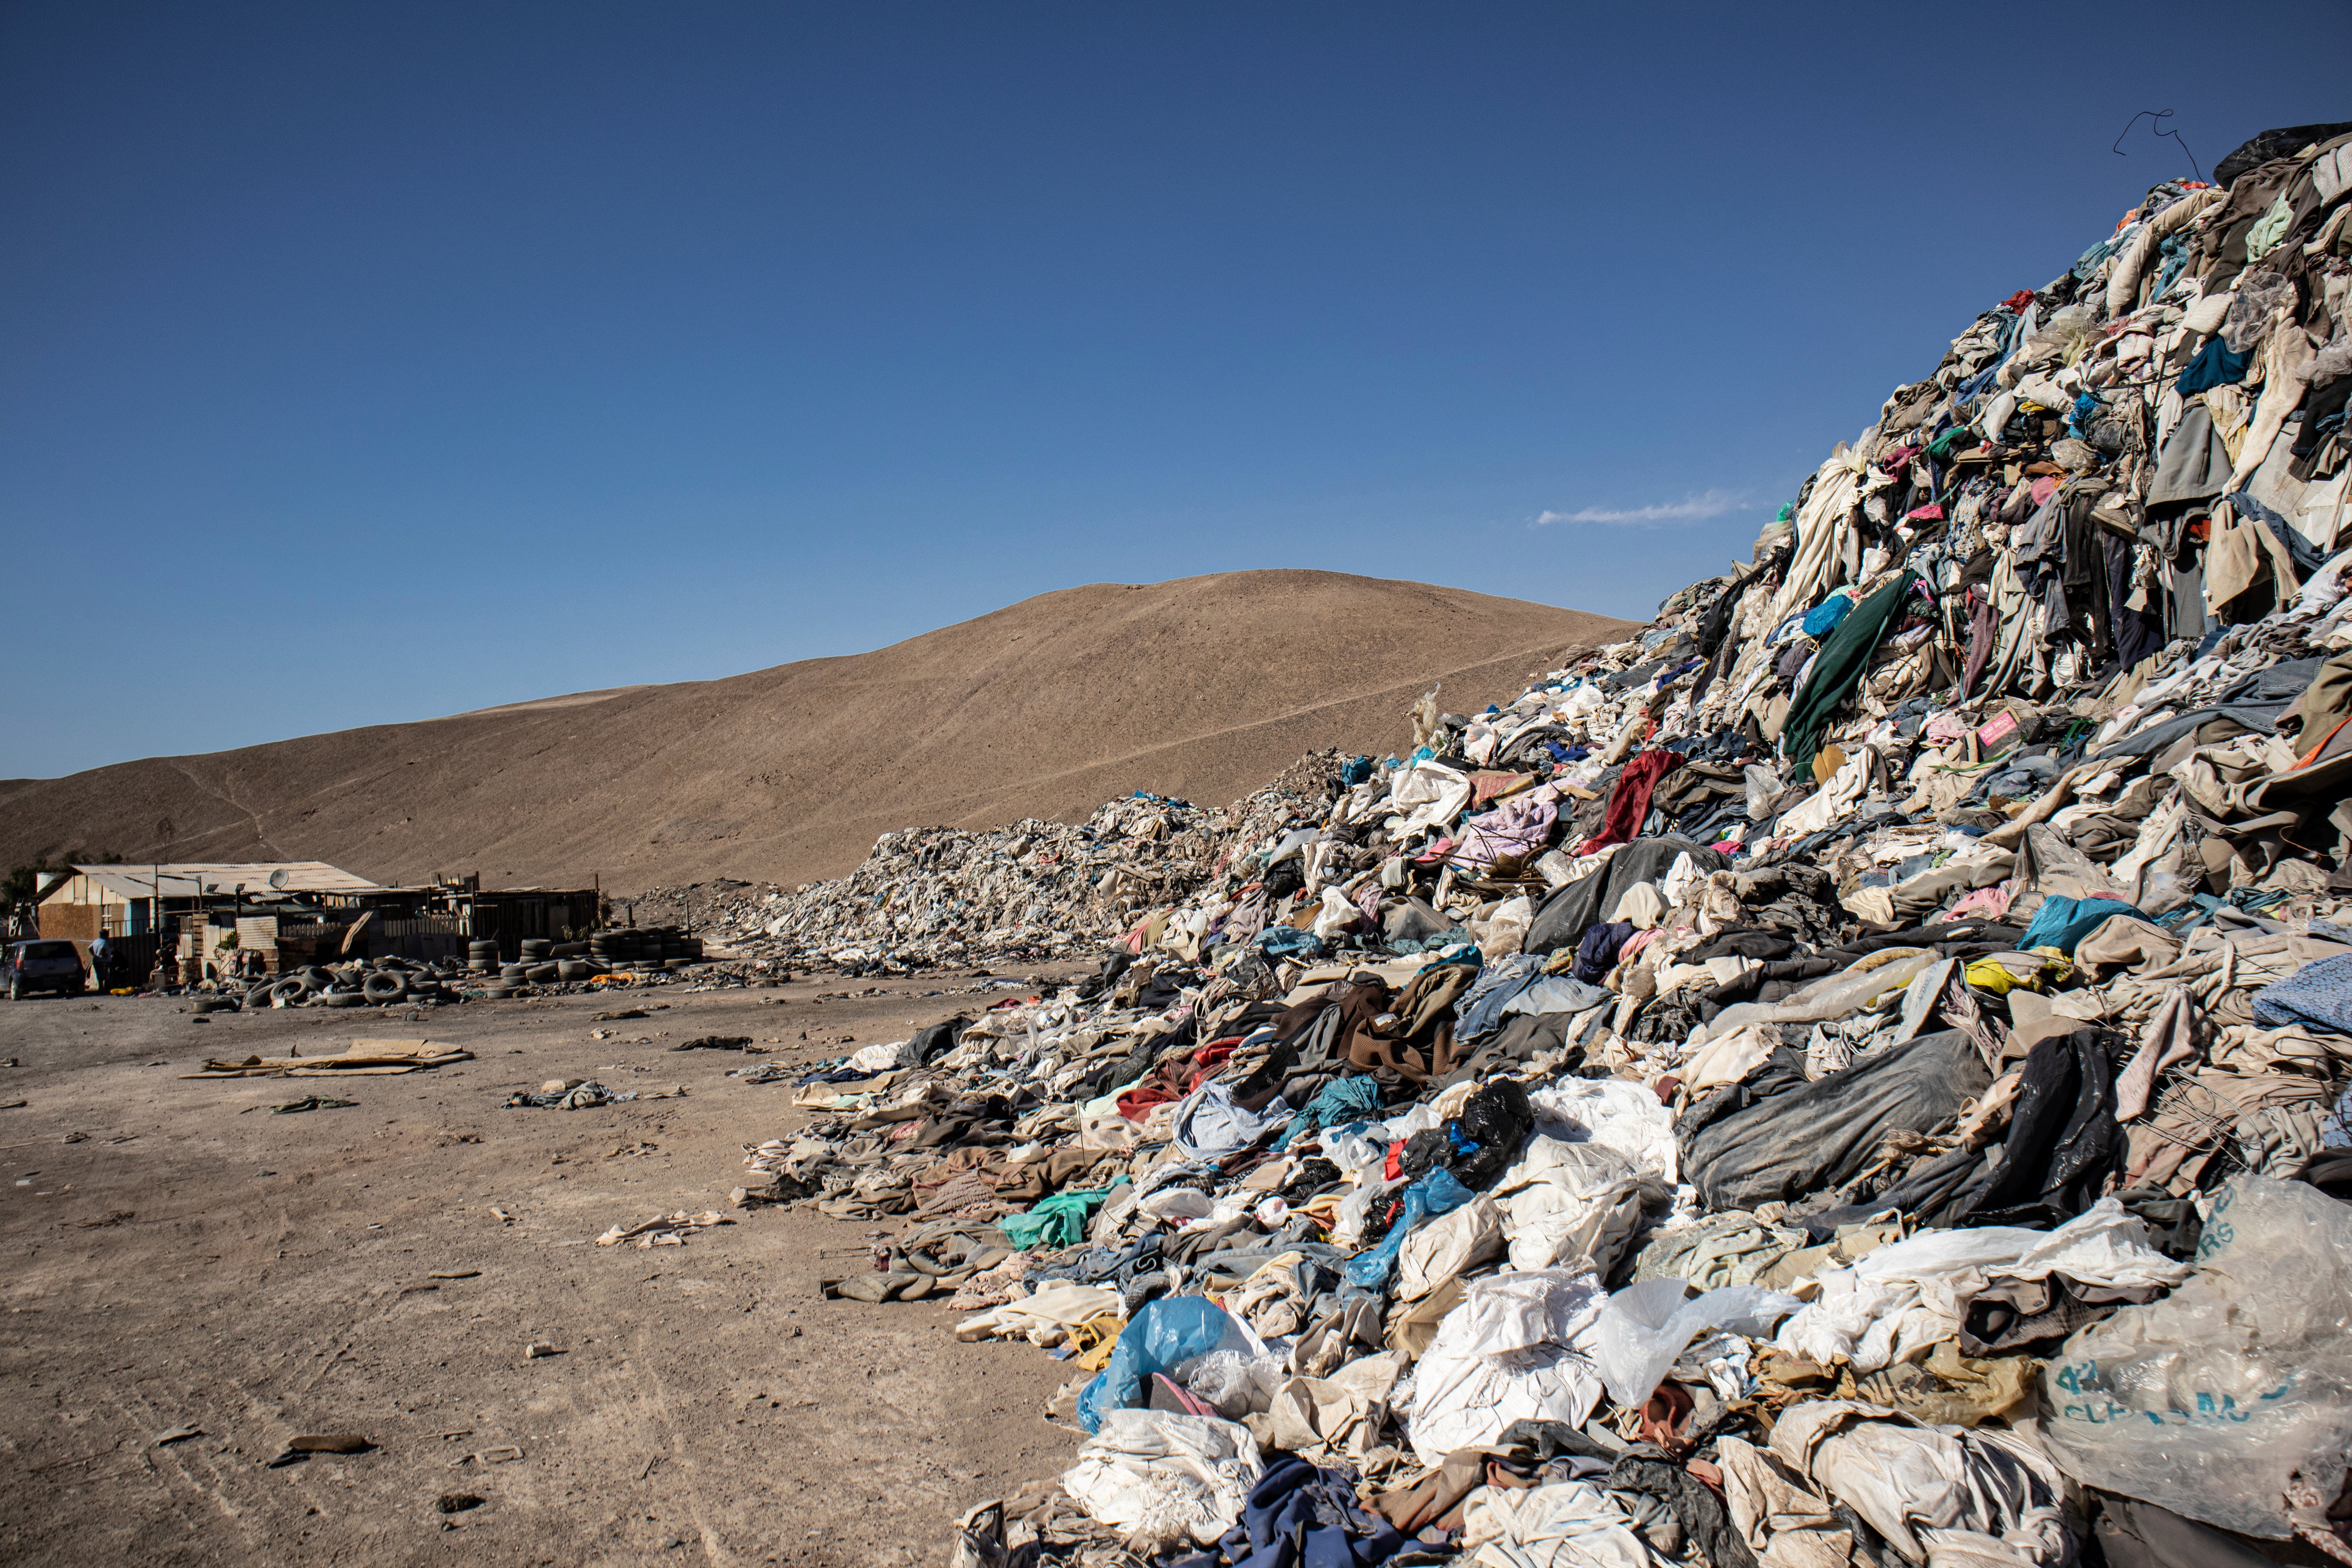 Clothes form a new dune in the desert outside of Iquique. (Photo: Antonio Cossio, AP)